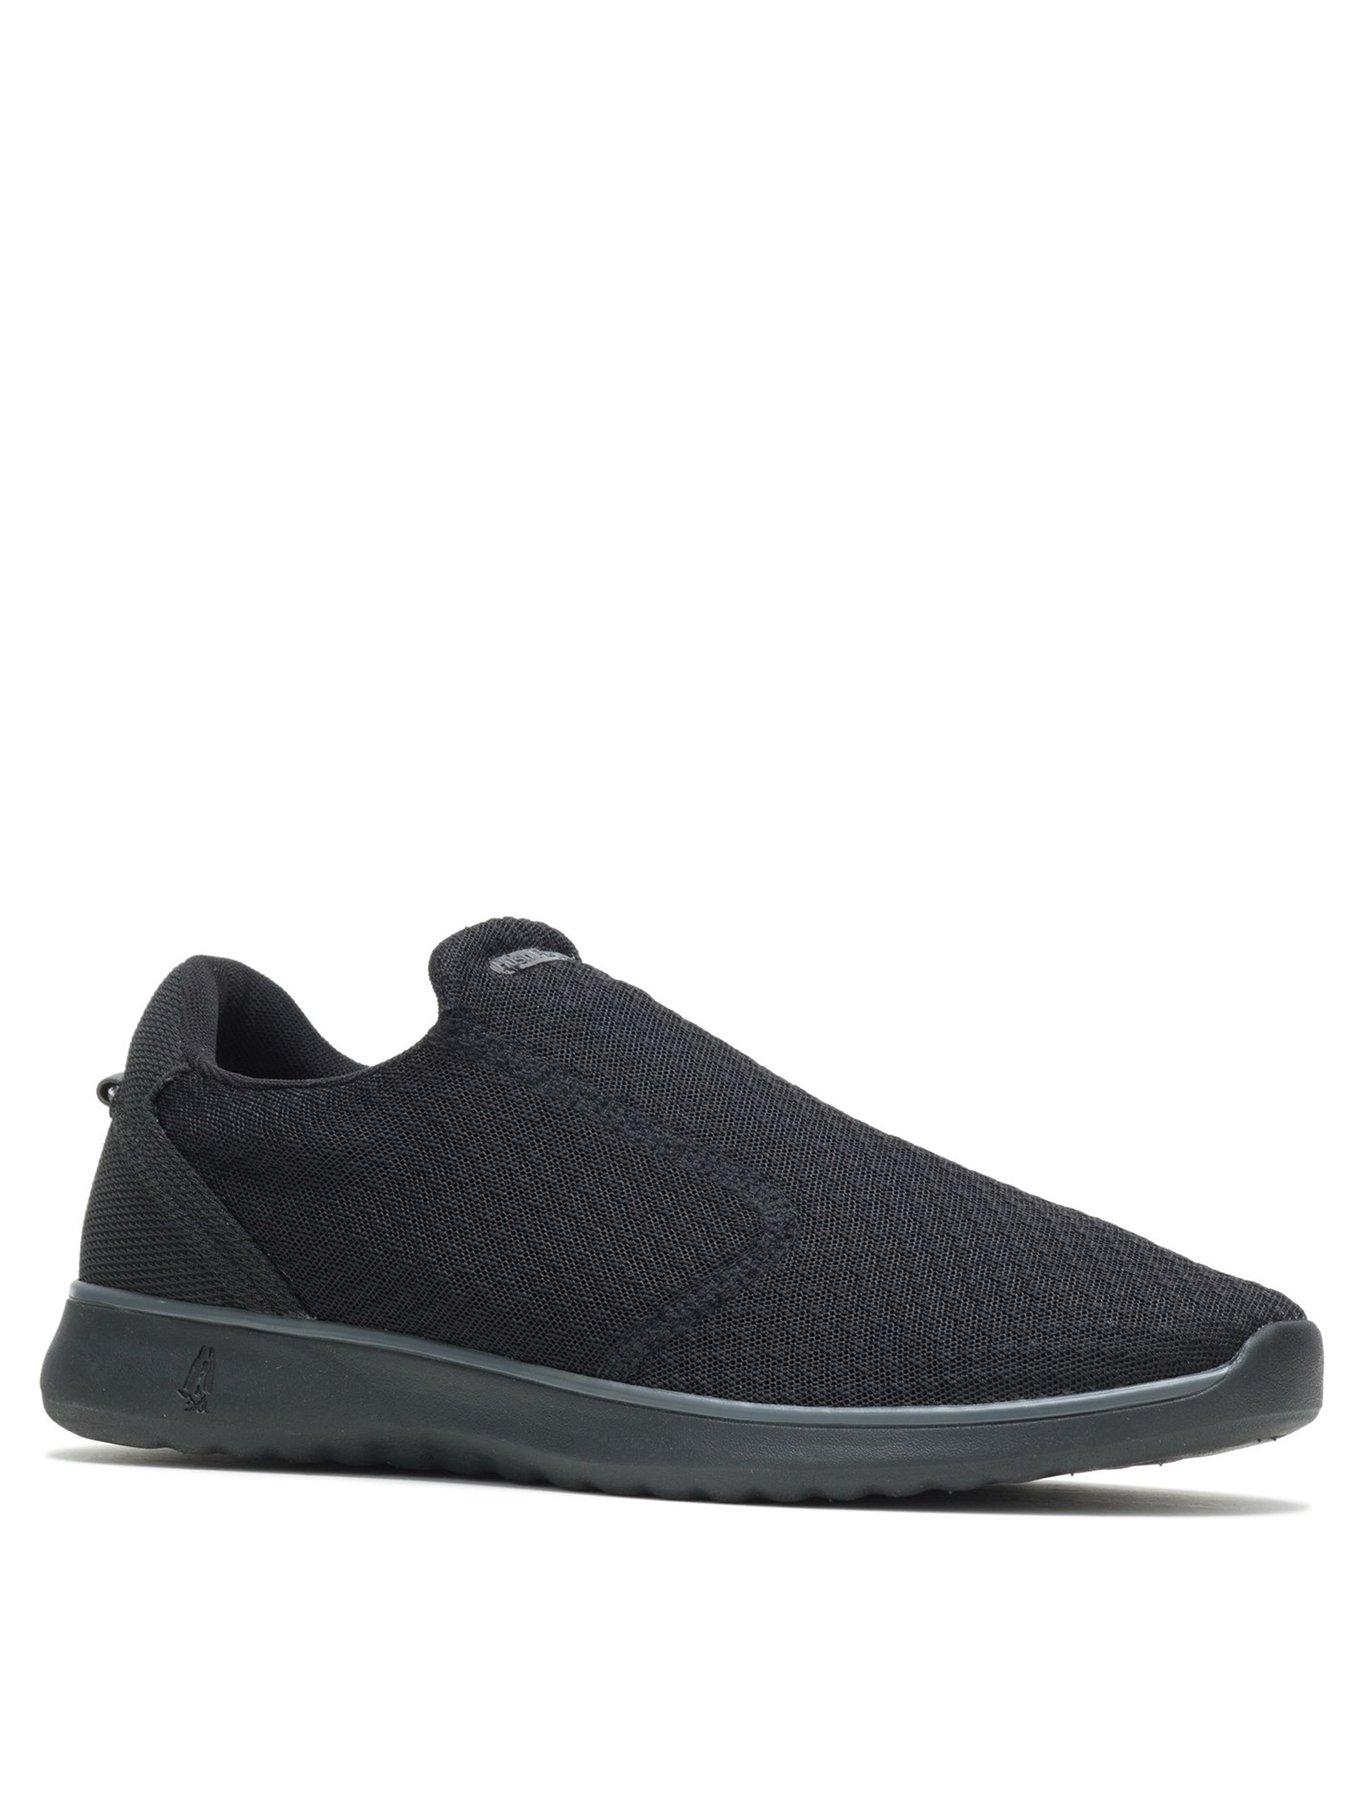 Hush Puppies Good Slip On Shoes - Navy | very.co.uk